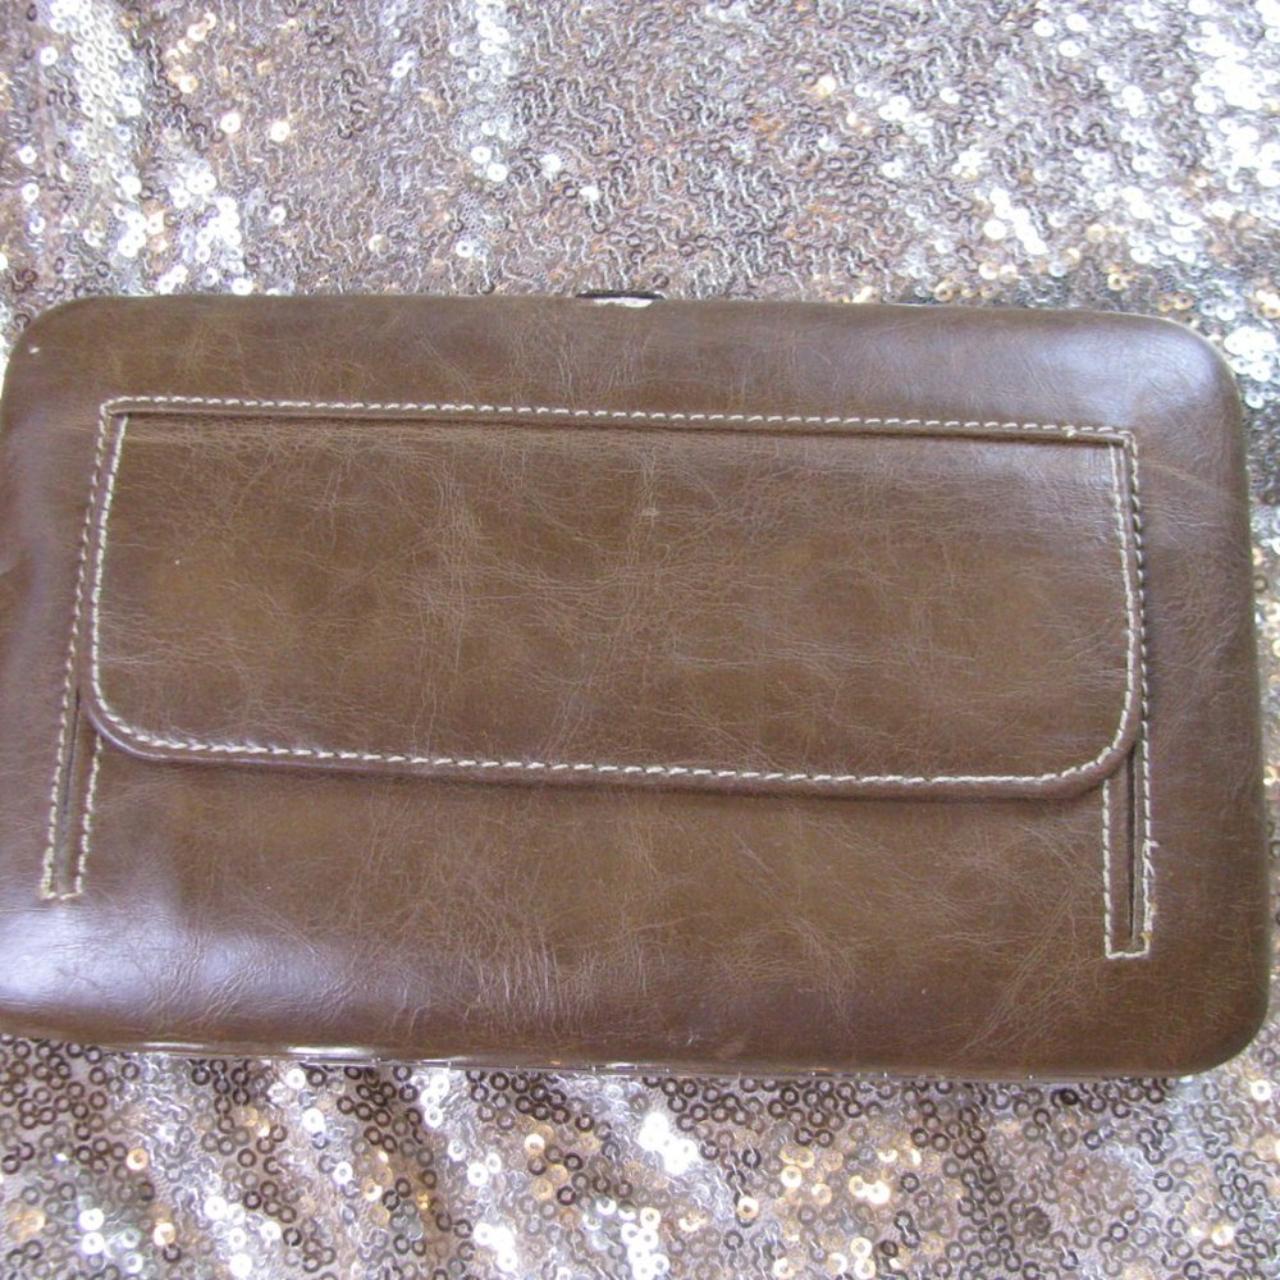 Product Image 2 - Country Road  brown wallet
Hard